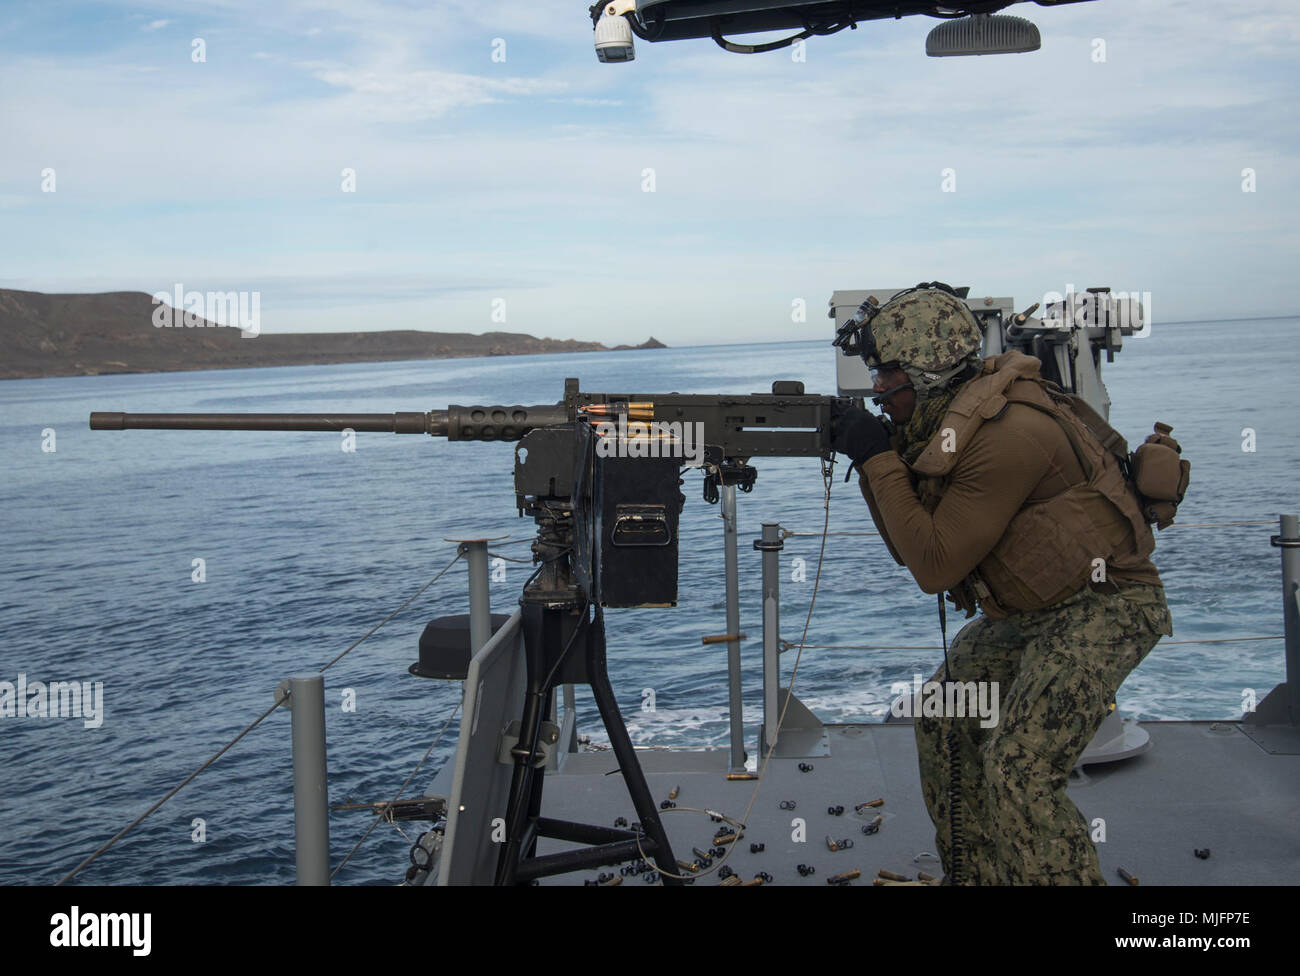 SAN CLEMENTE ISLAND, Calif. (March 21, 2018) Boatswain’s Mate 2nd Class Ralphaell Punch, a native of Mount Union, Philadelphia assigned to Coastal Riverine Squadron (CRS) 3, fires a .50-caliber machine gun aboard MKVI patrol boat during a live fire exercise as part of unit level training provided by Coastal Riverine Group (CRG) 1 Training and Evaluation Unit. CRG provides a core capability to defend designated high value assets throughout the green and blue-water environment and providing deployable Adaptive Force Packages (AFP) worldwide in an integrated, joint and combined theater of operati Stock Photo